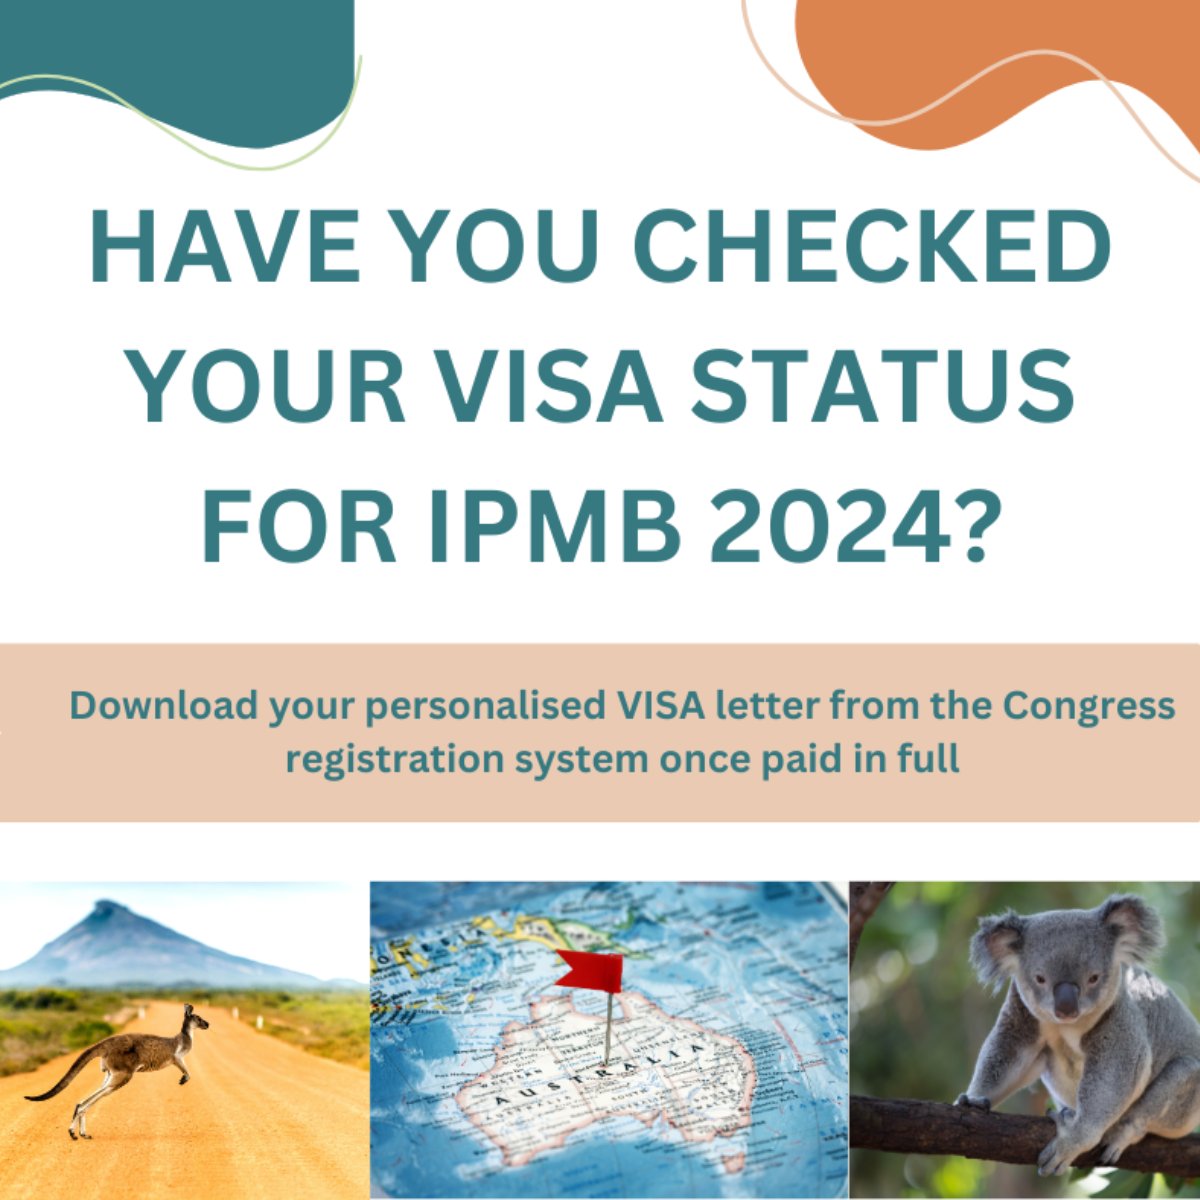 Need to book your flights for #IPMB2024 and apply for your visa? Visit ipmb2024.org for more information and download your visa letter now!